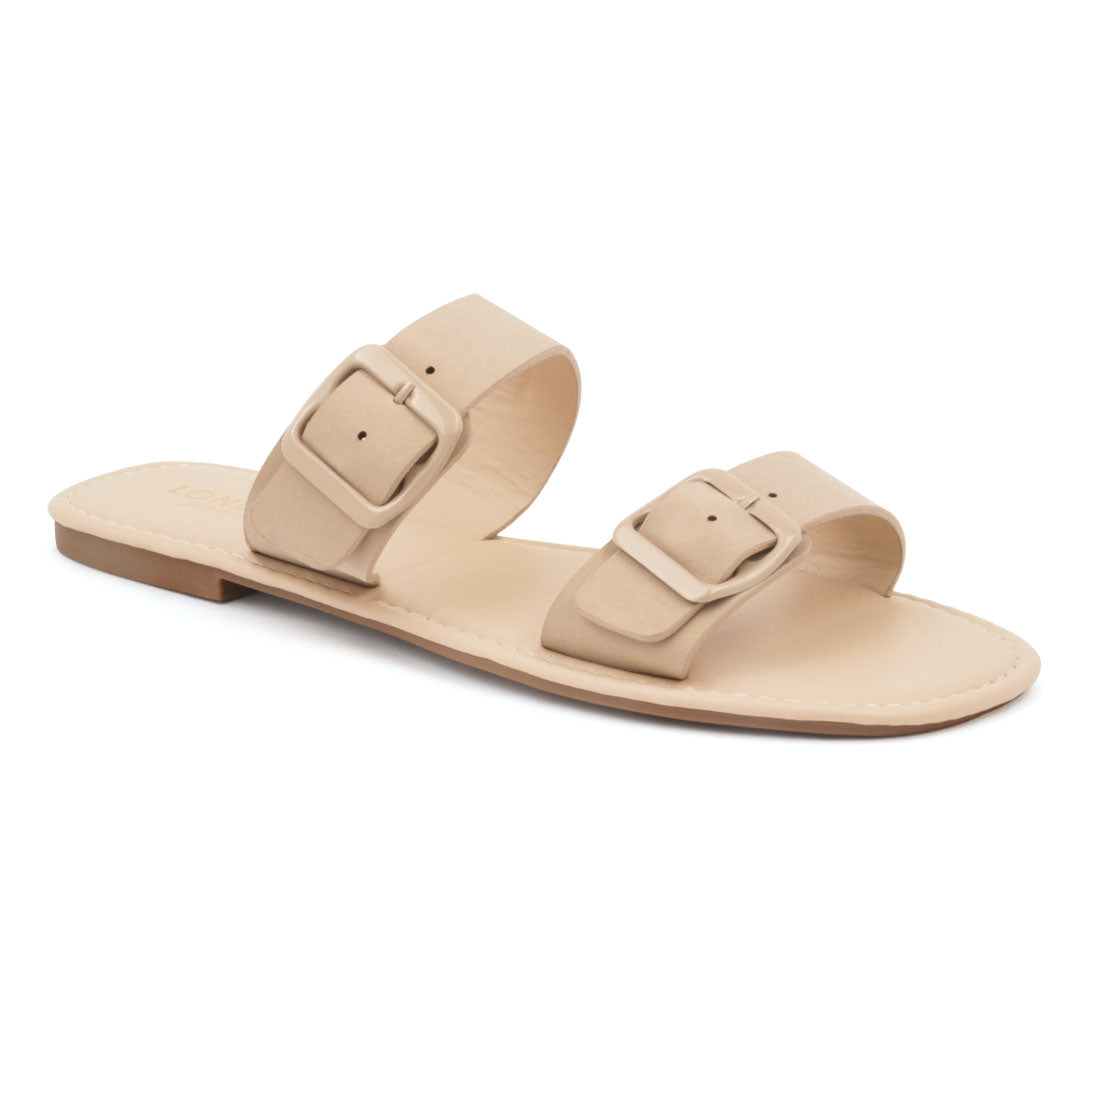 Nude Slip-On with two straps - Nude